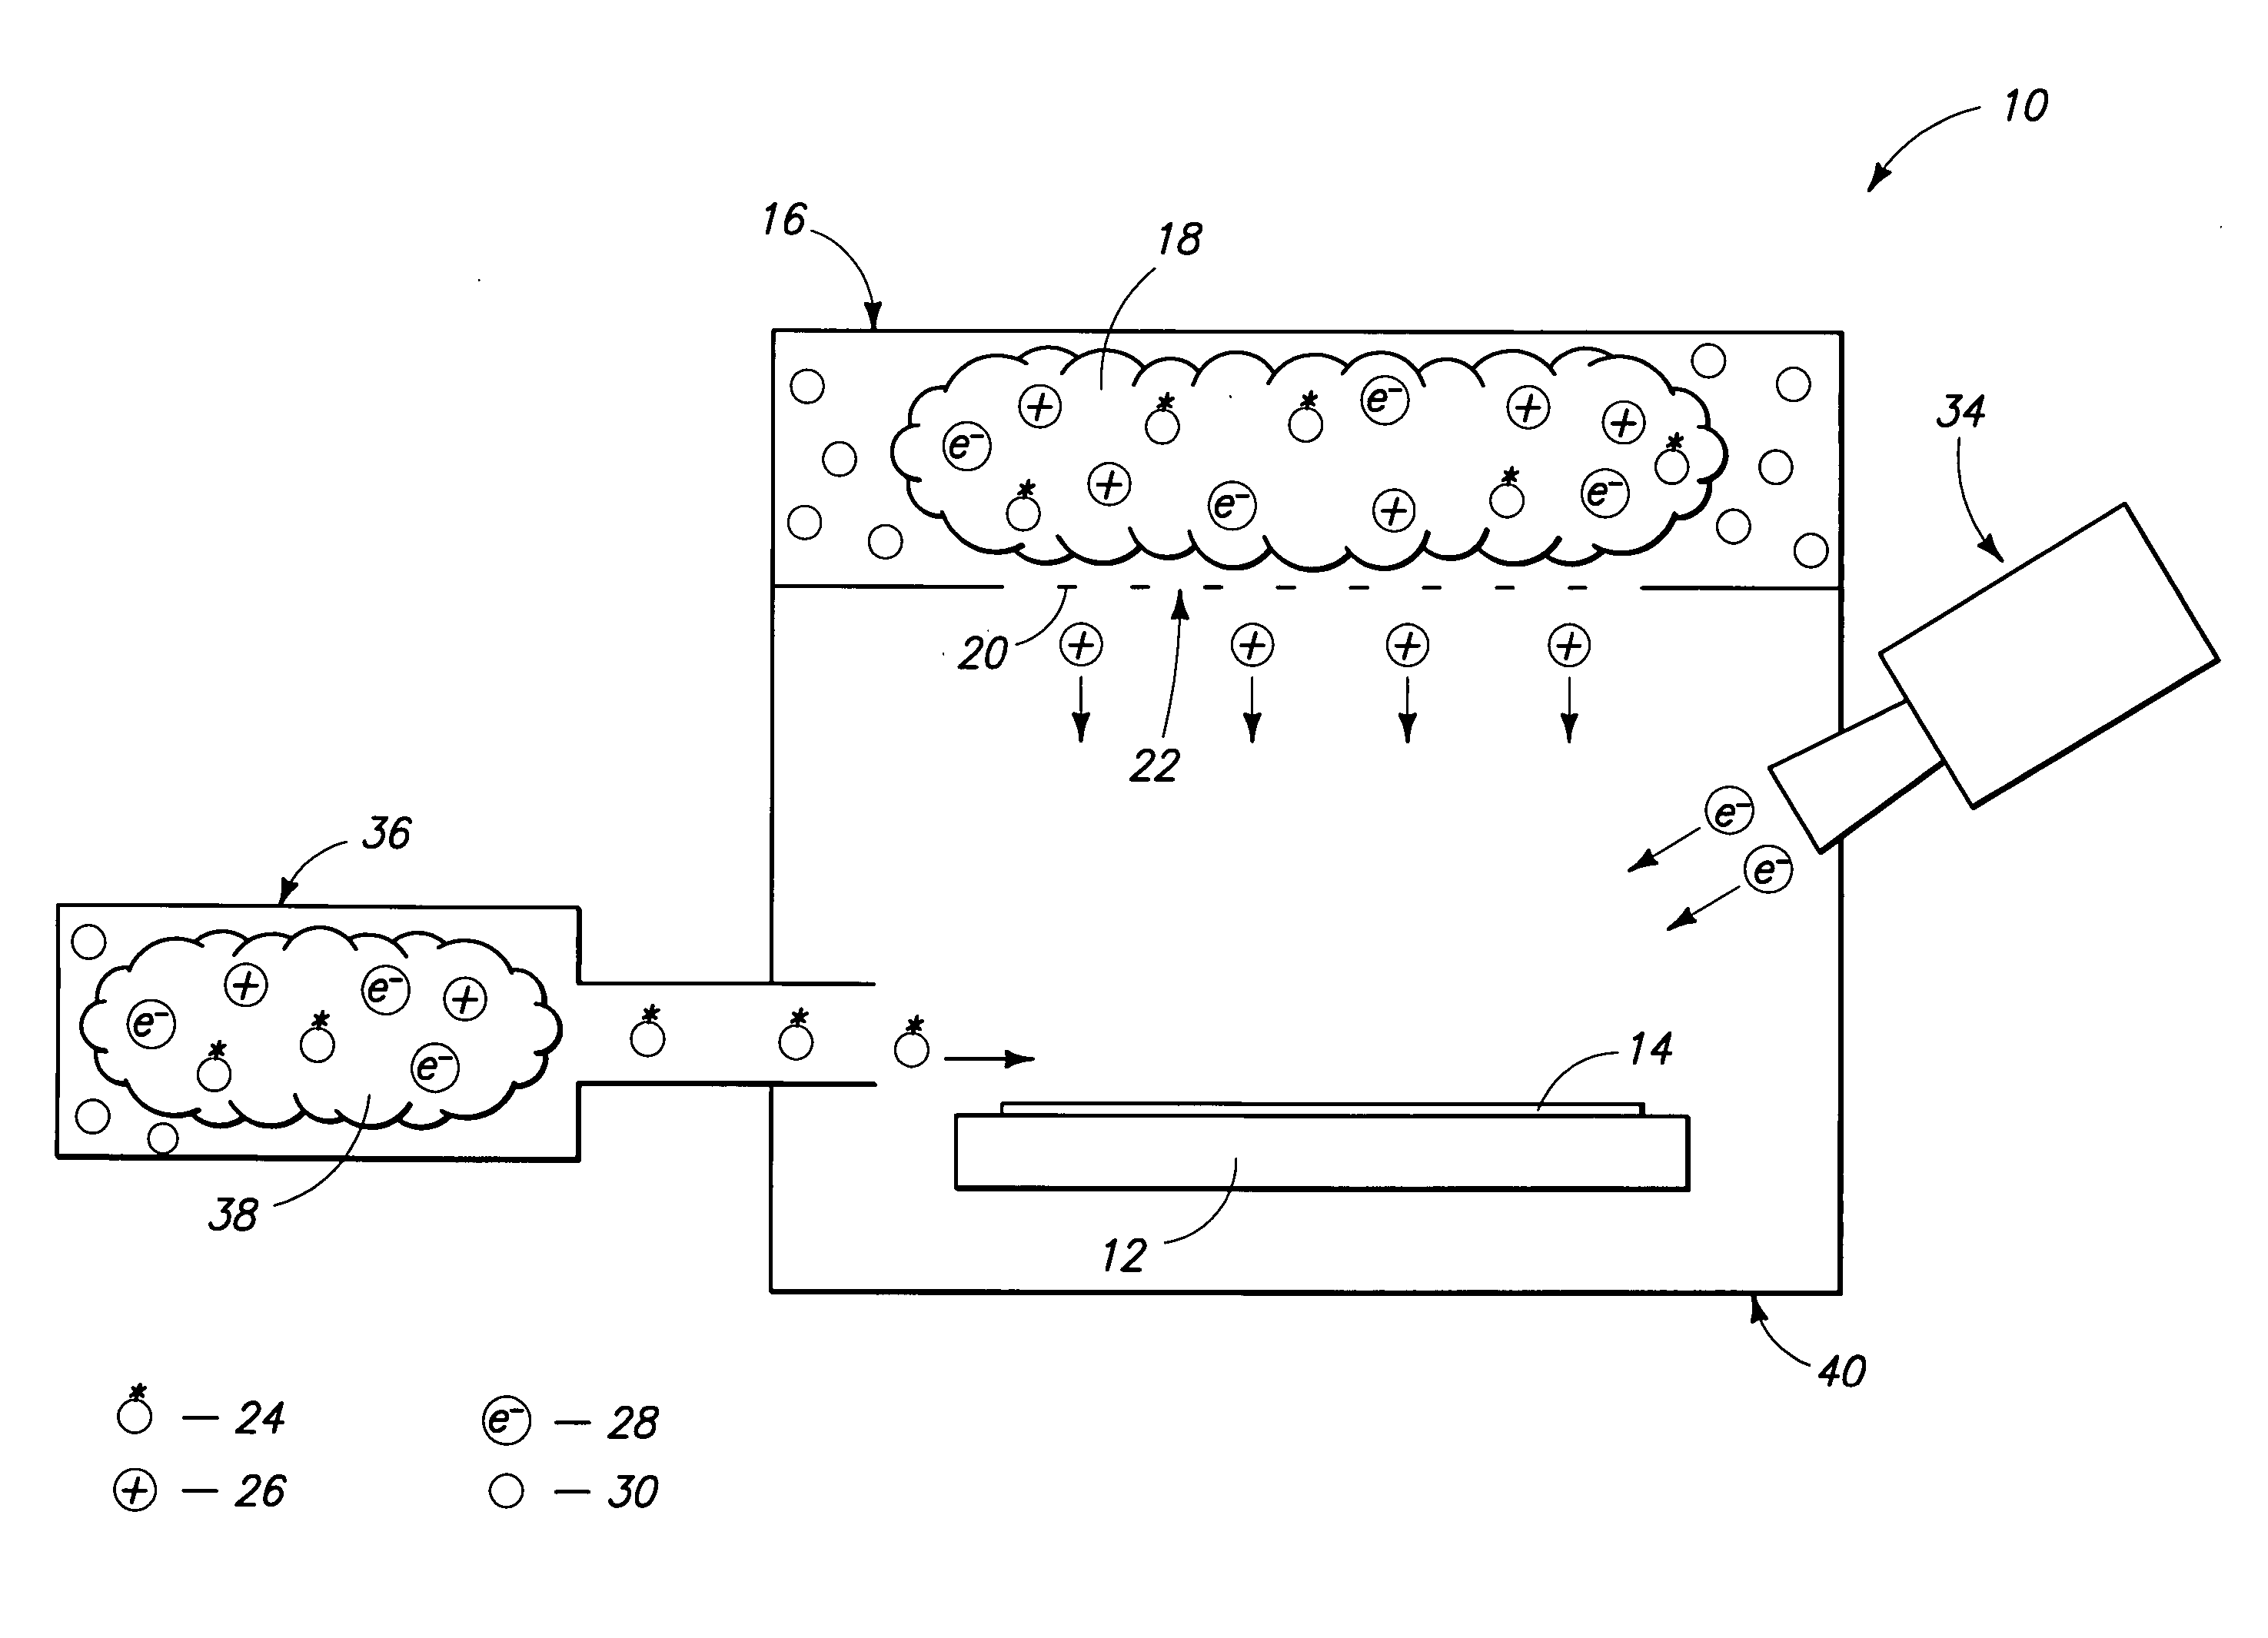 Plasma processing apparatuses and methods